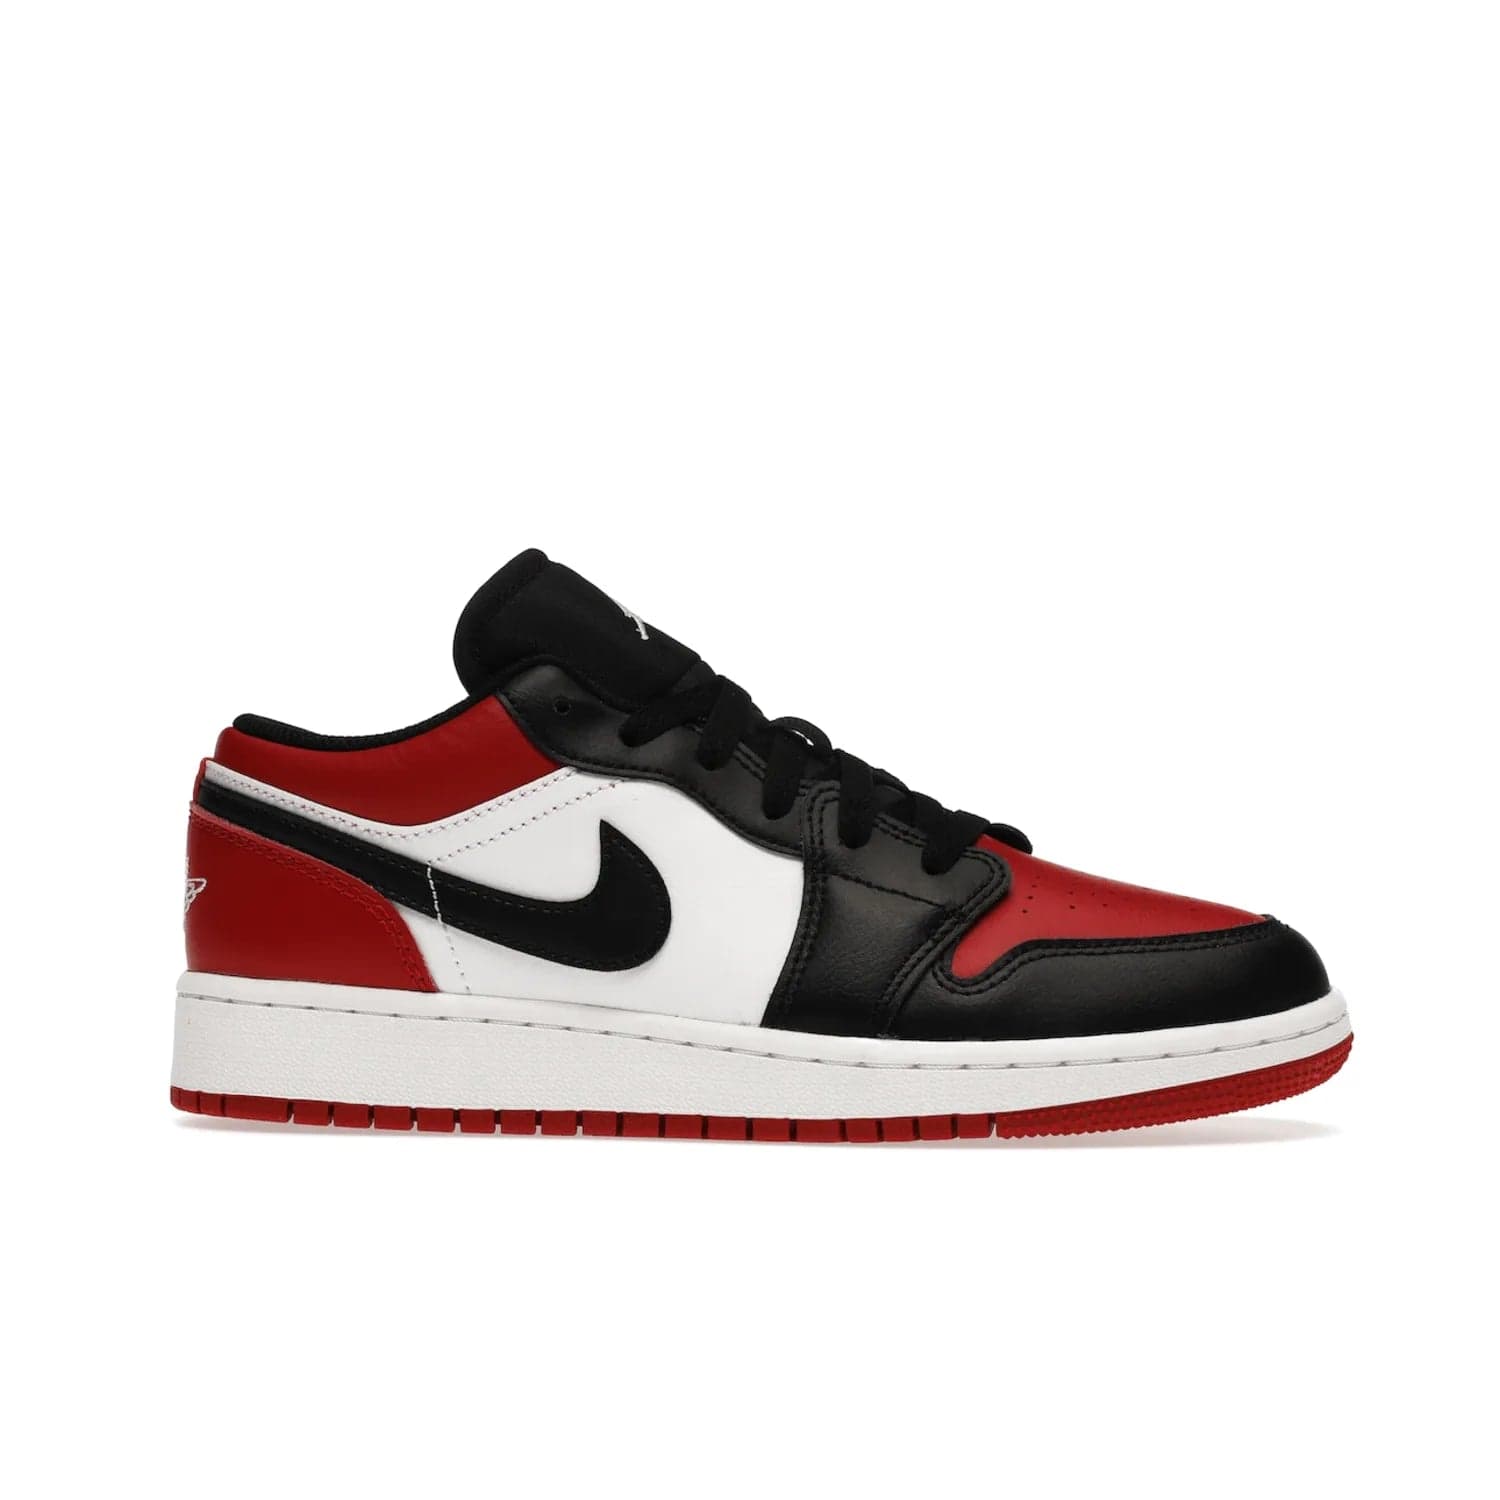 Jordan 1 Low Bred Toe (GS) - Image 2 - Only at www.BallersClubKickz.com - #
Iconic sneaker from Jordan brand with classic colorway, unique detailing & Air Jordan Wings logo. Step into the shoes of the greats with the Jordan 1 Low Bred Toe GS!